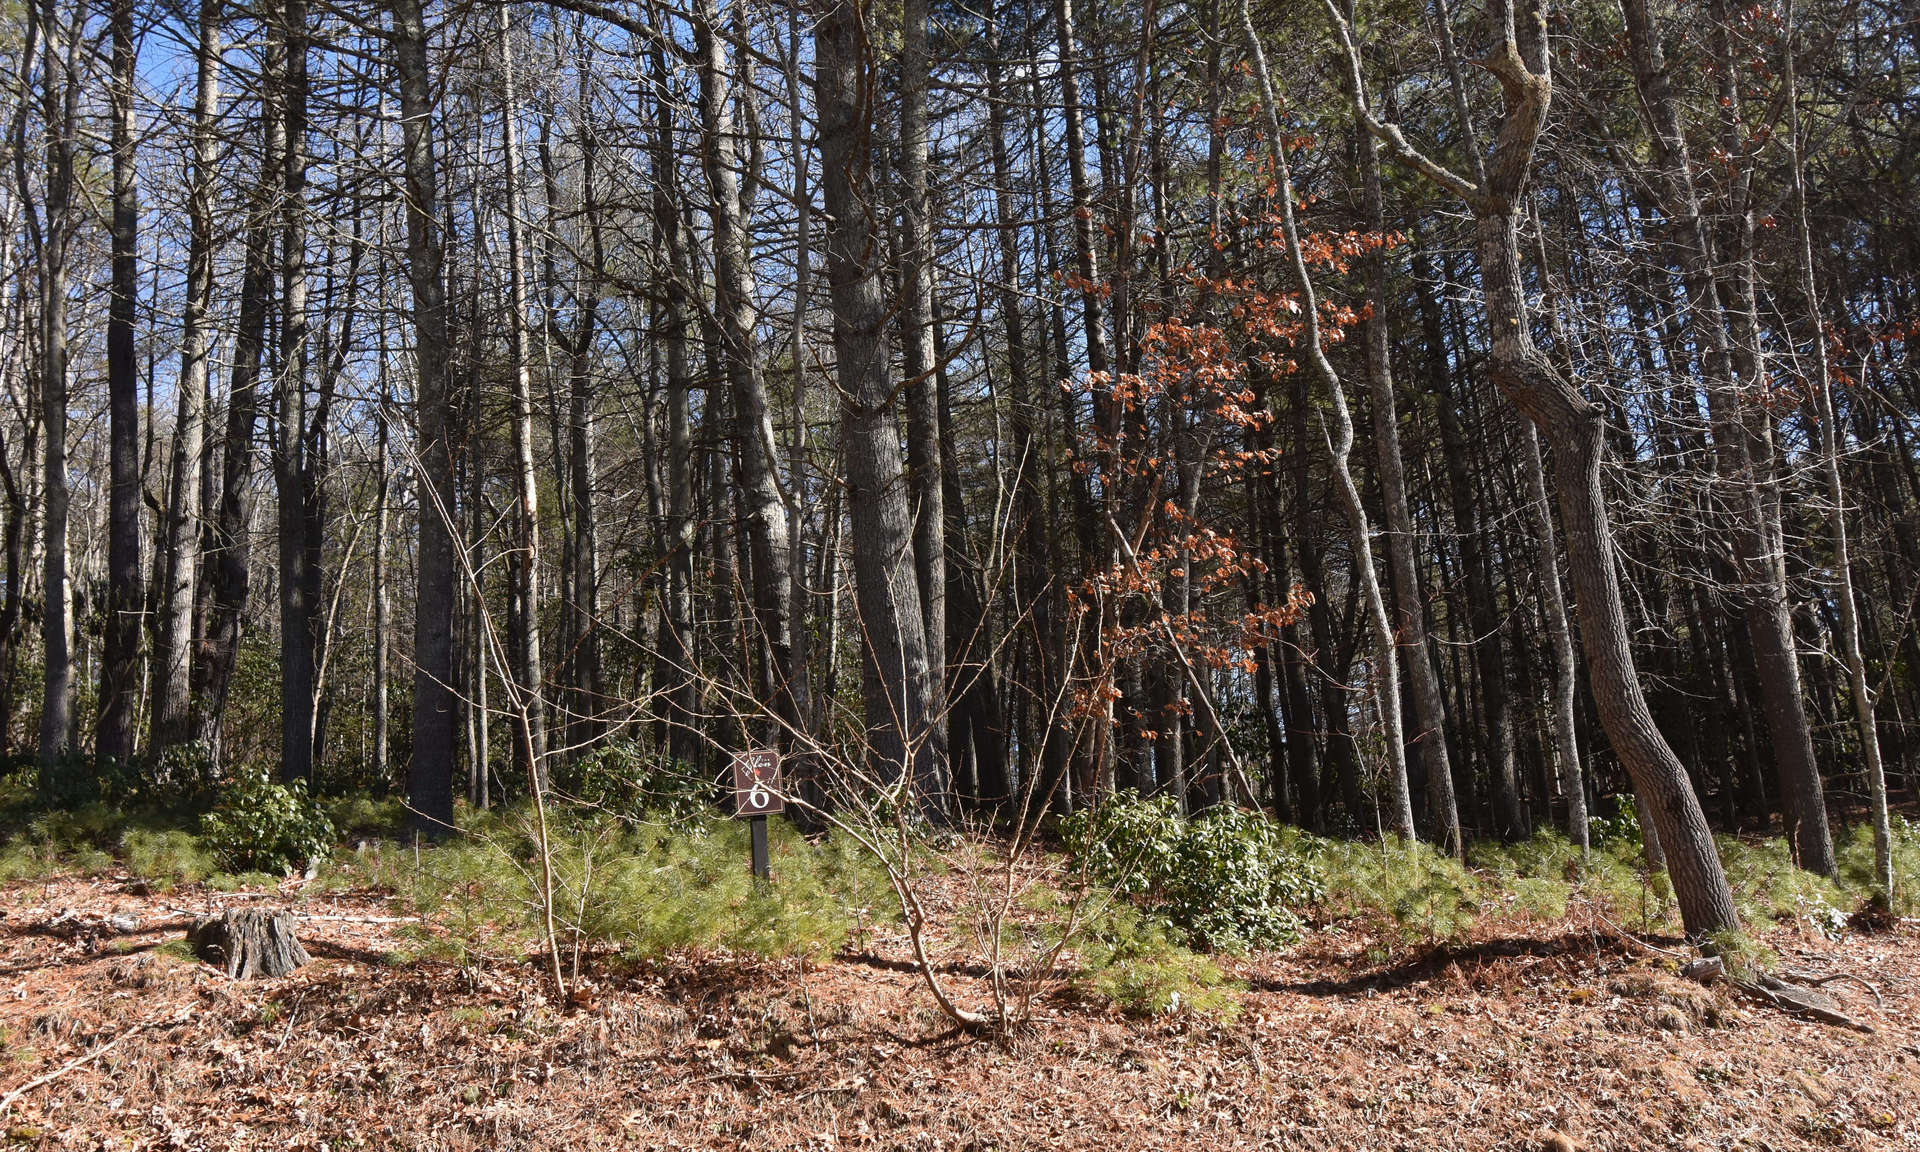 Lot 6 is now available and offers a beautifully wooded 1.29 acre home site for your mountain cabin or  full time home.